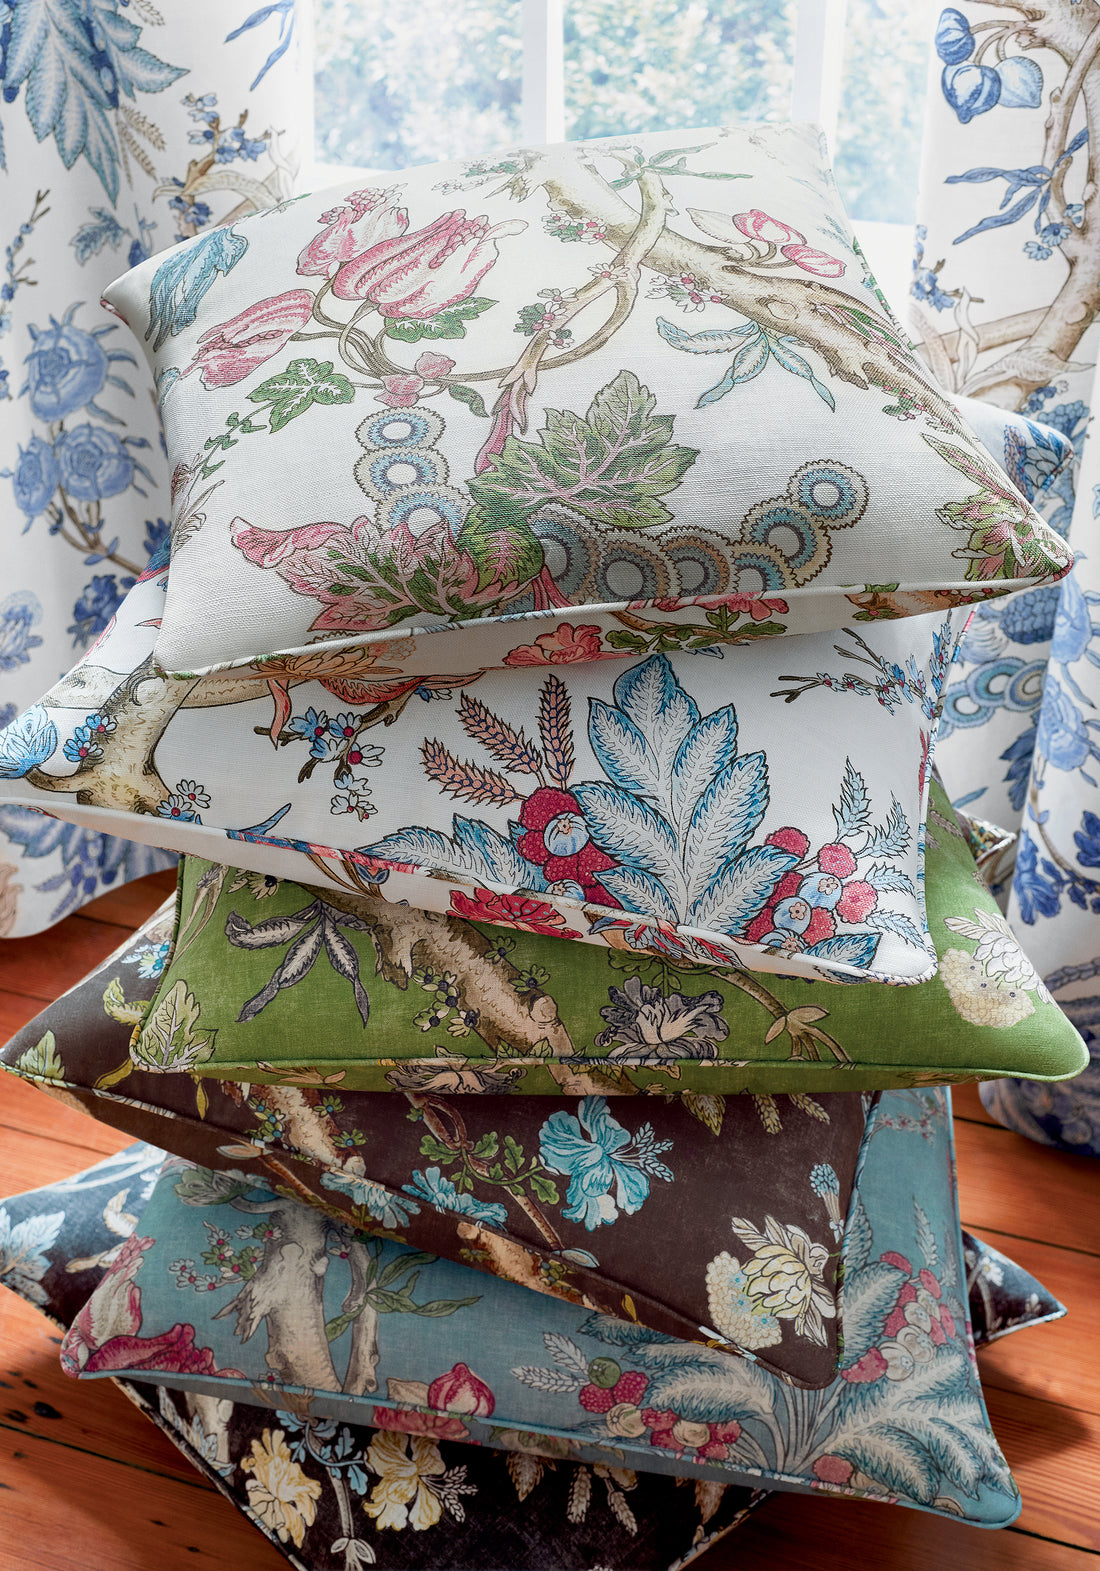 Drapery and collection of pillows in Chatelain printed fabric featuring brown color fabric - pattern number F910843 - by Thibaut in the Heritage collection